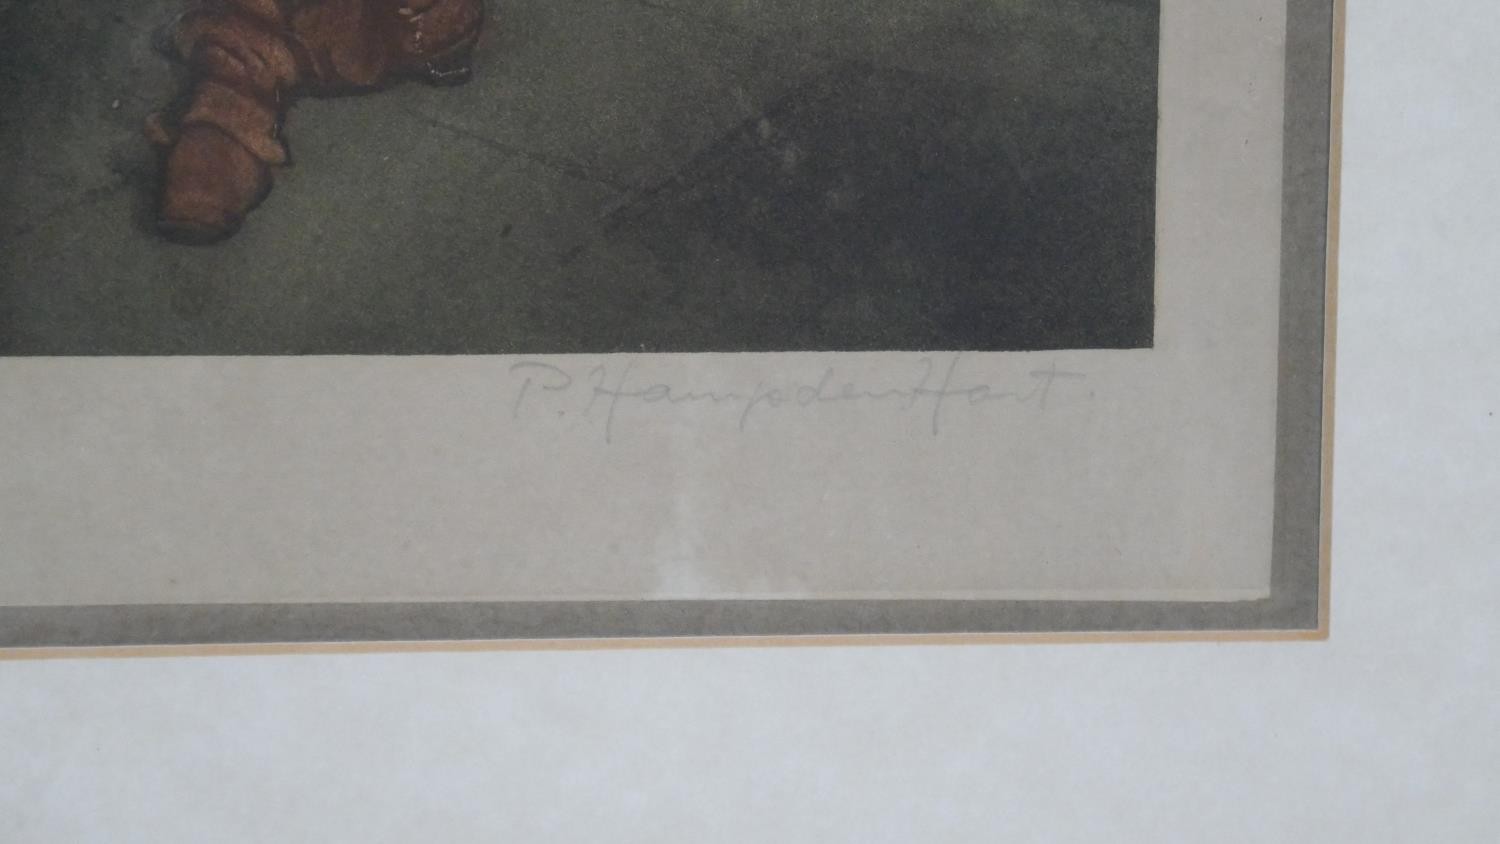 P Hampden Hart, aquatints of four famous paintings, with impressed water mark and signed. H.56 W. - Image 19 of 20